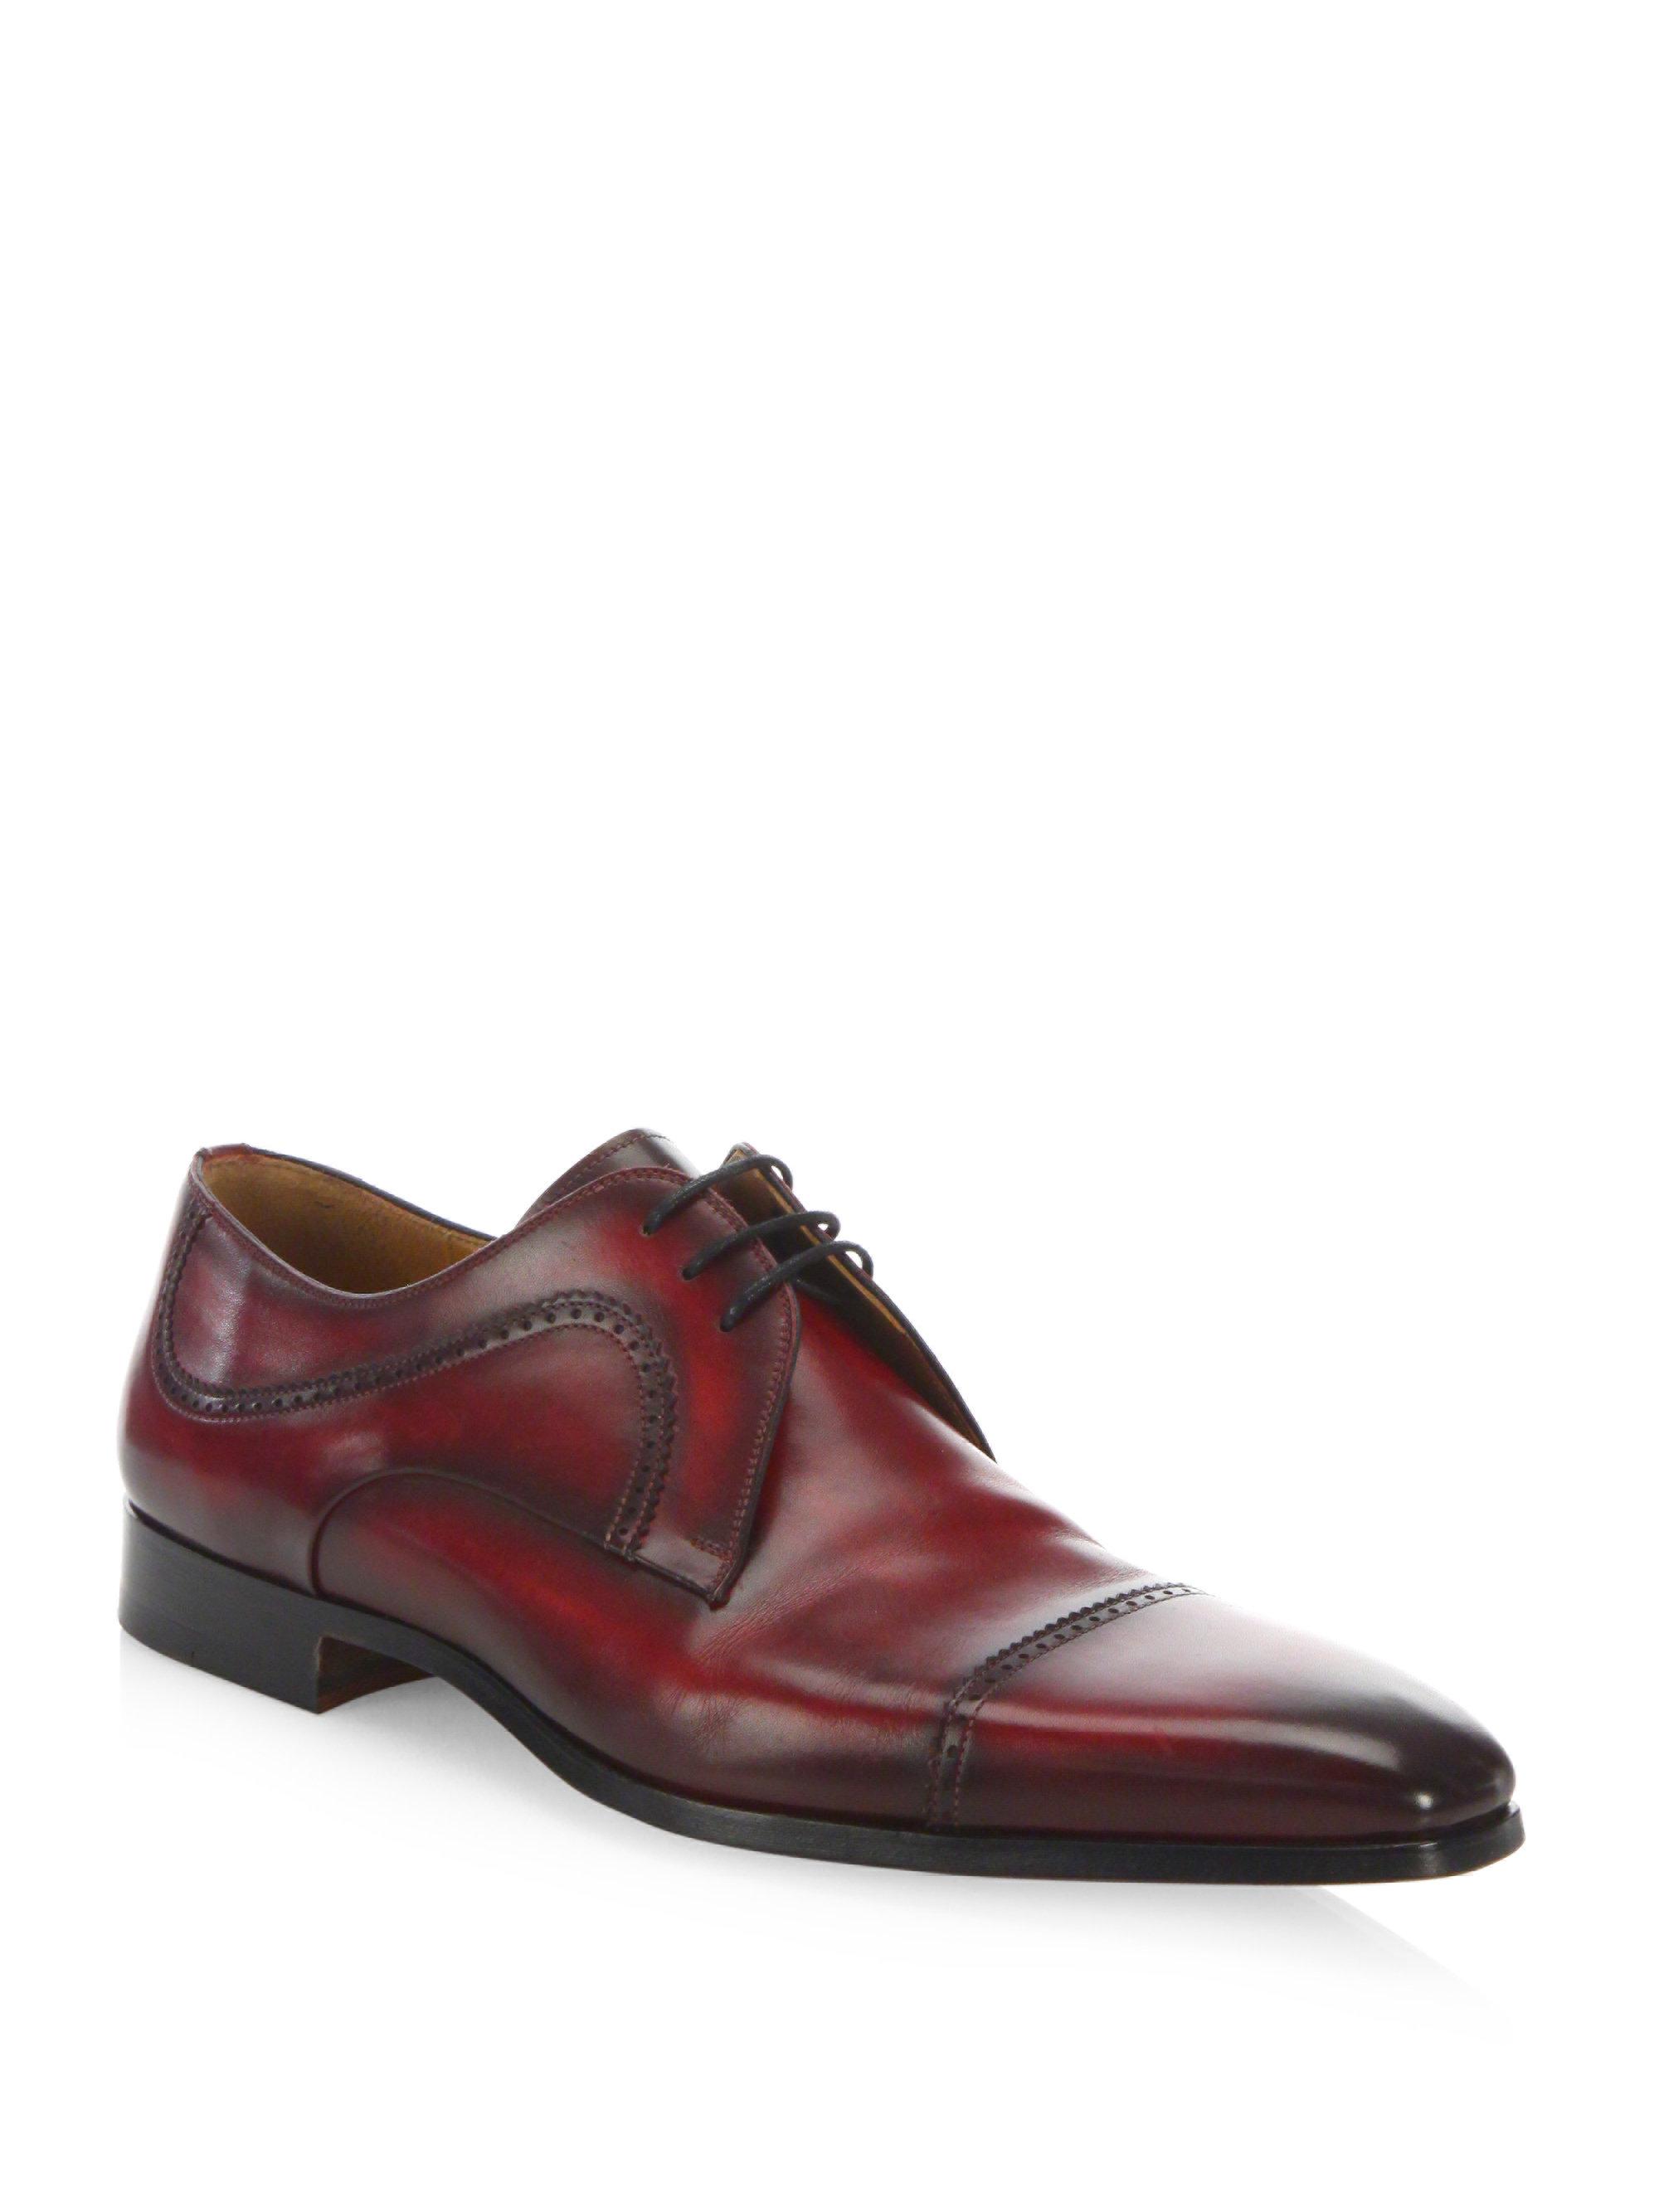 saks off 5th mens shoes